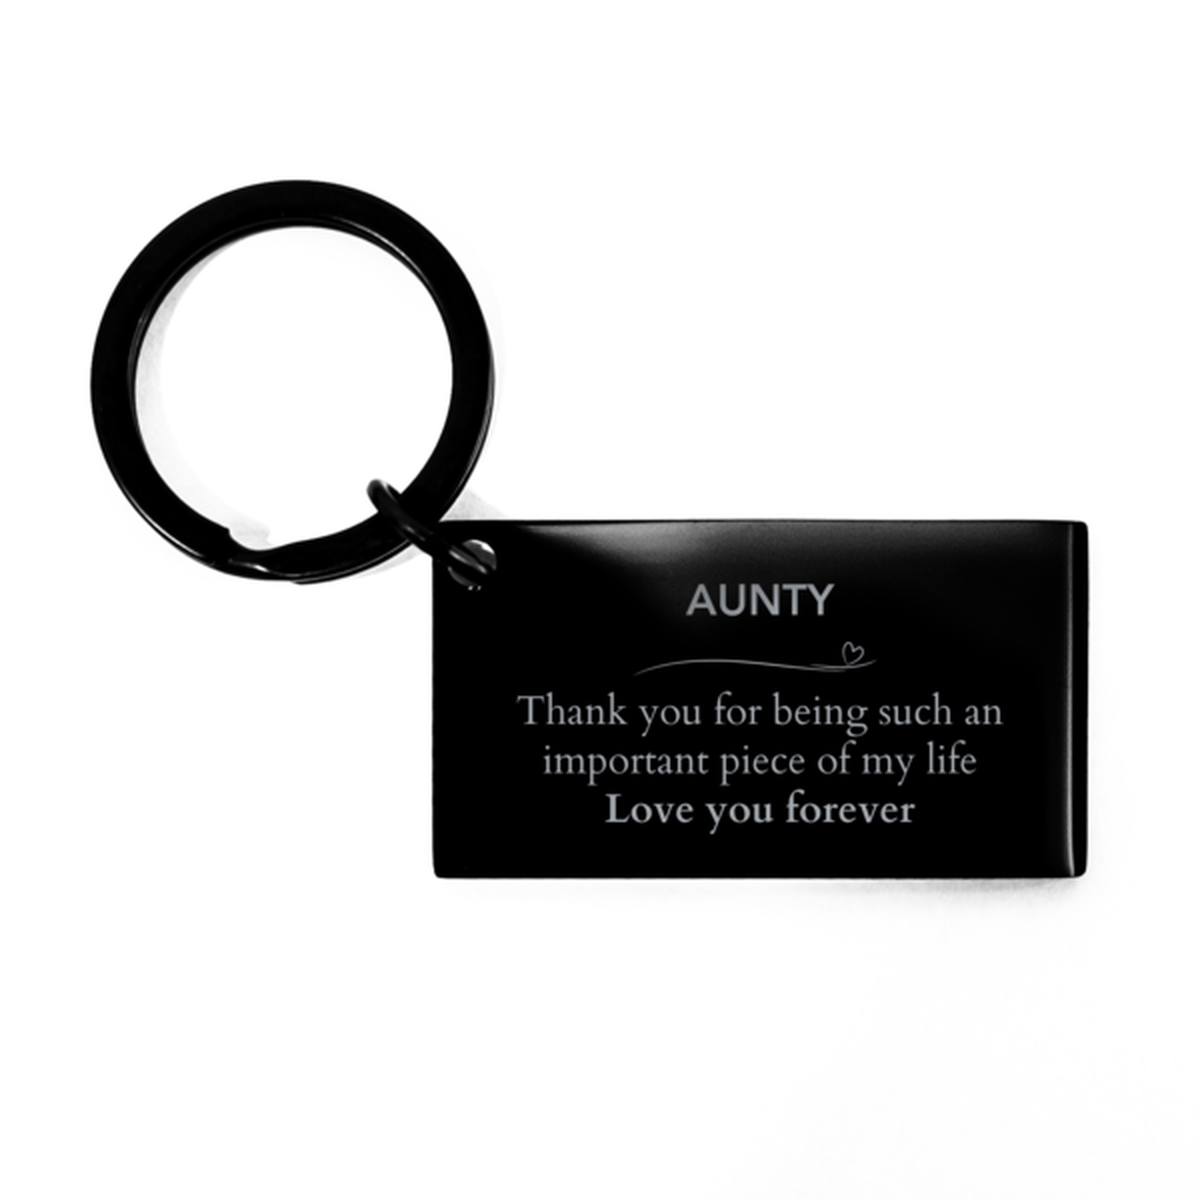 Appropriate Aunty Keychain Epic Birthday Gifts for Aunty Thank you for being such an important piece of my life Aunty Christmas Mothers Fathers Day